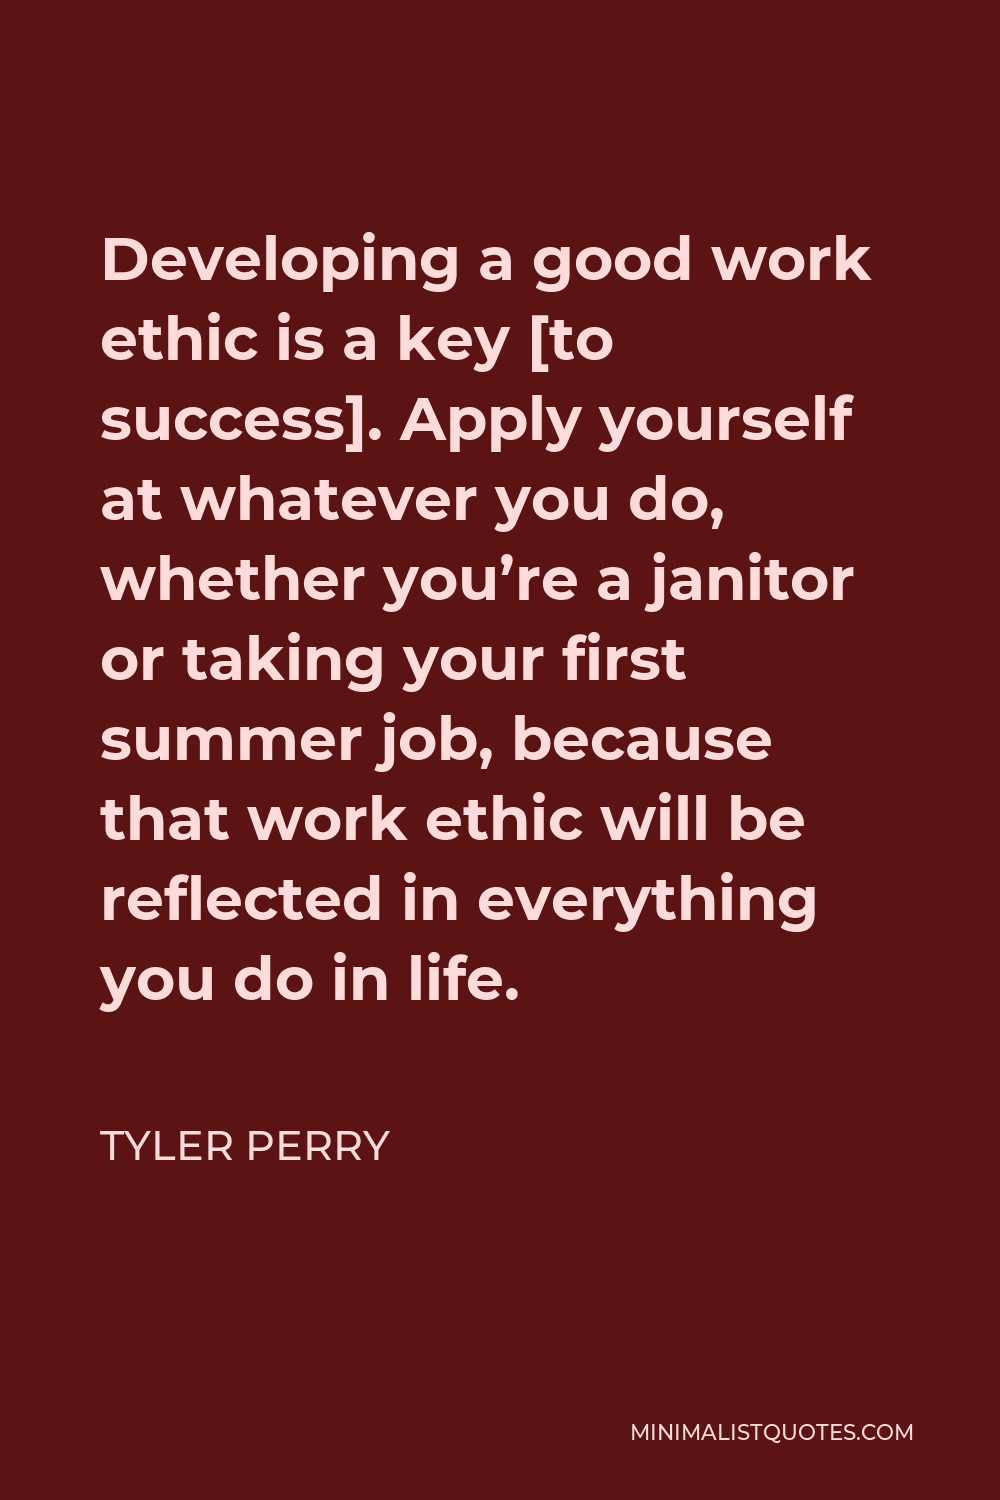 Tyler Perry quote: when you put on your shortest dress, please